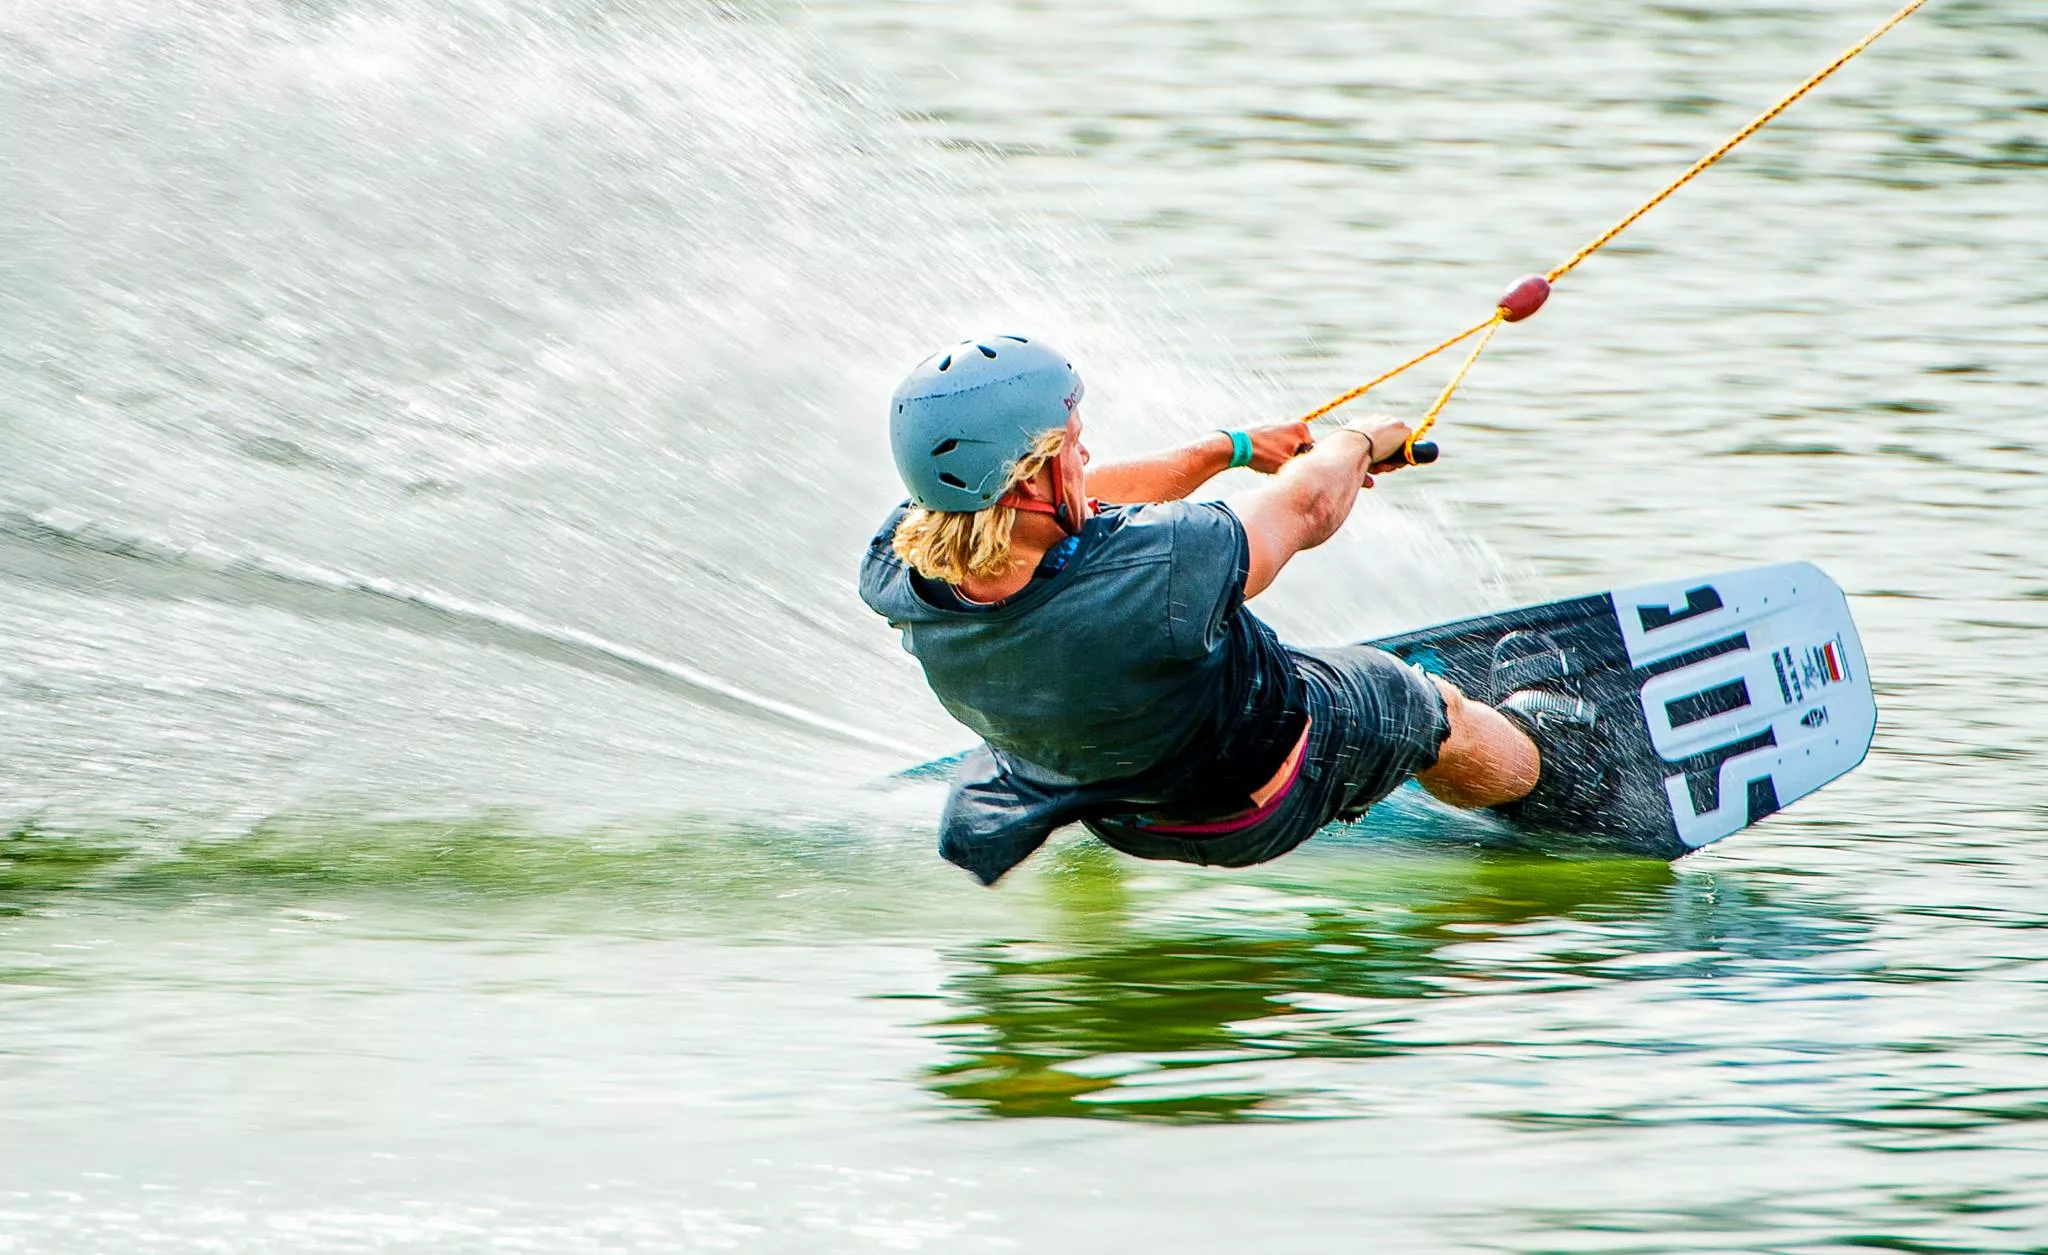 Sheffield Cable Waterski & Aqua Park in United Kingdom, Europe | Wakeboarding - Rated 4.3